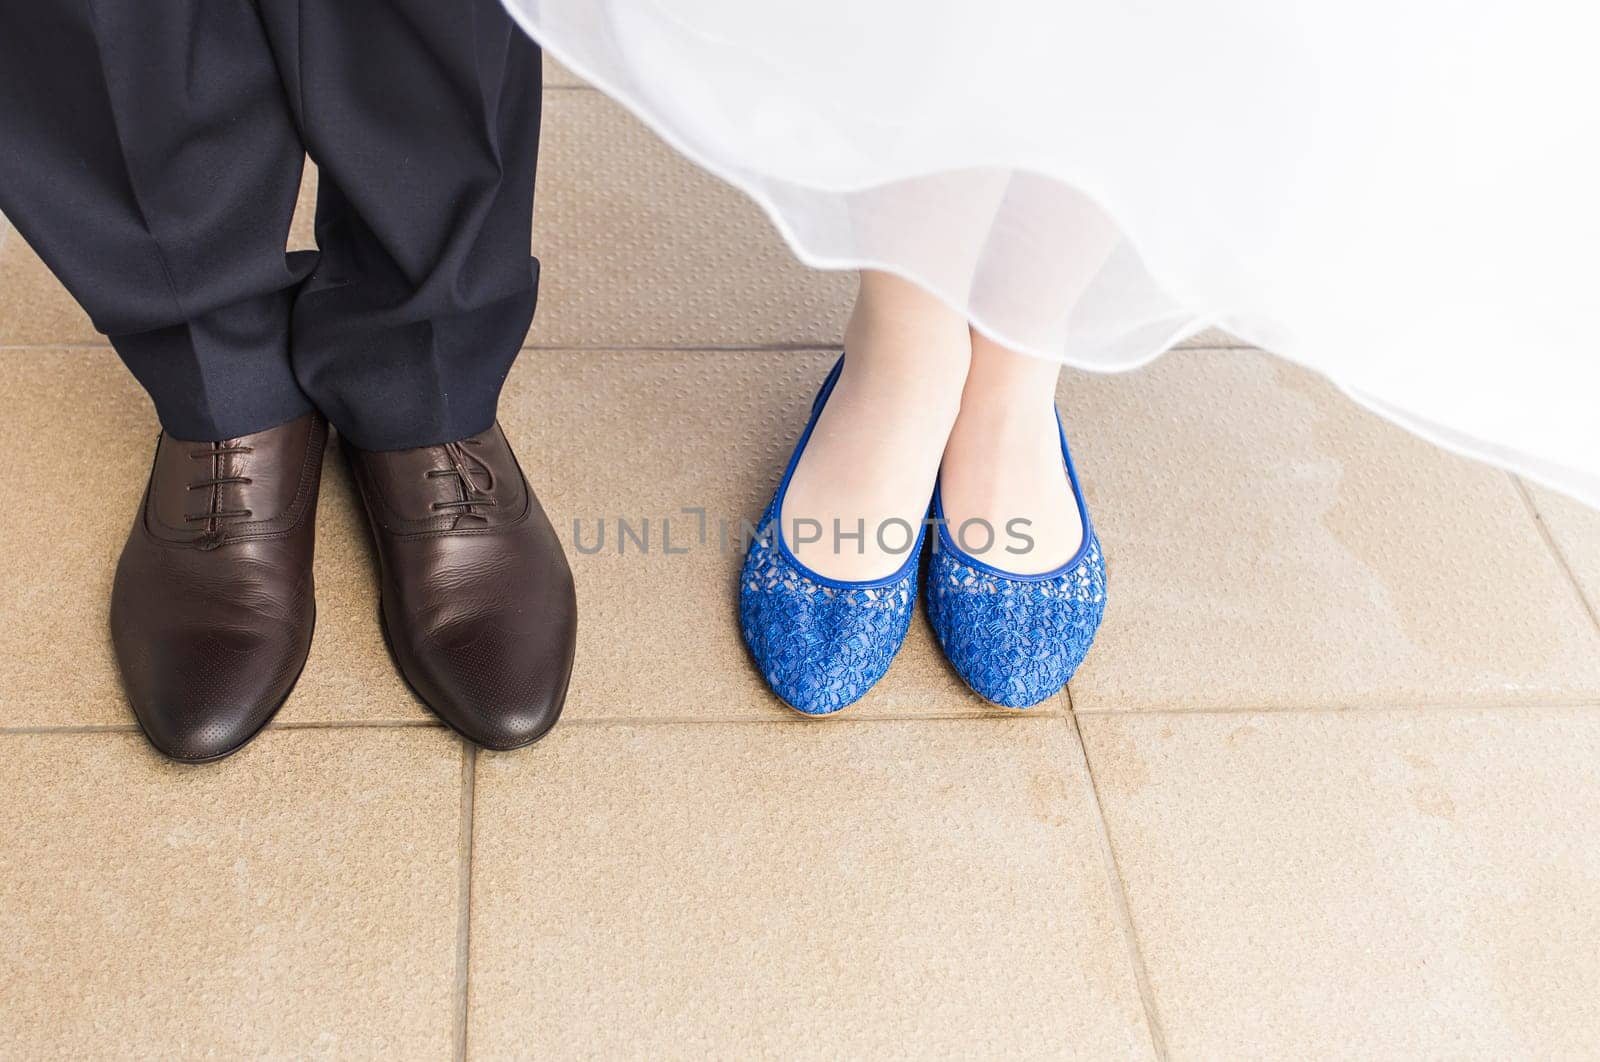 feet of bride and groom, wedding shoes close-up.